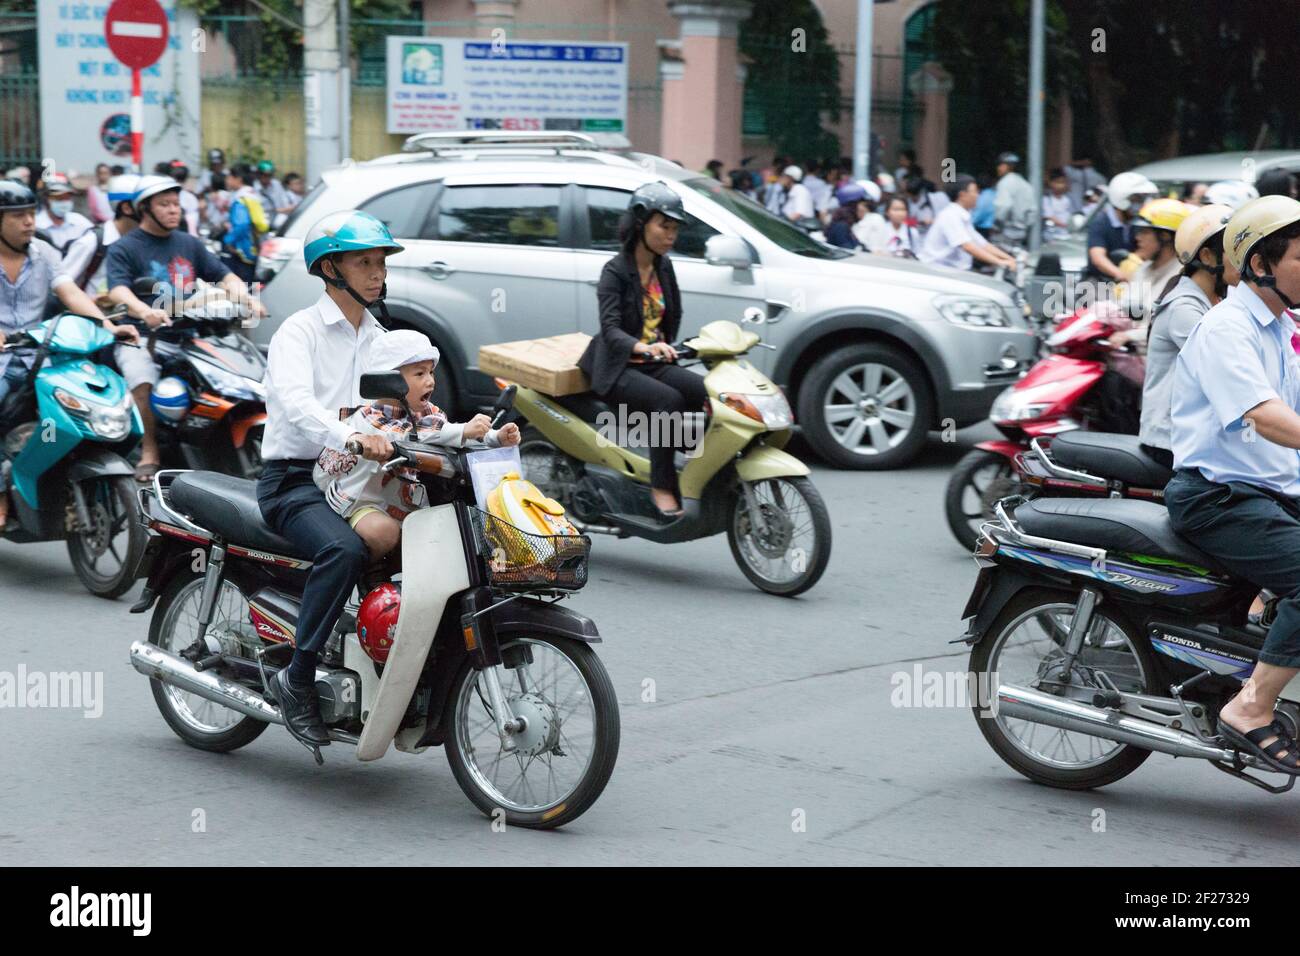 Vietnam, Ho Chi Minh City - Father and son on a scooter filled with other scooters during the early evening commute. Stock Photo